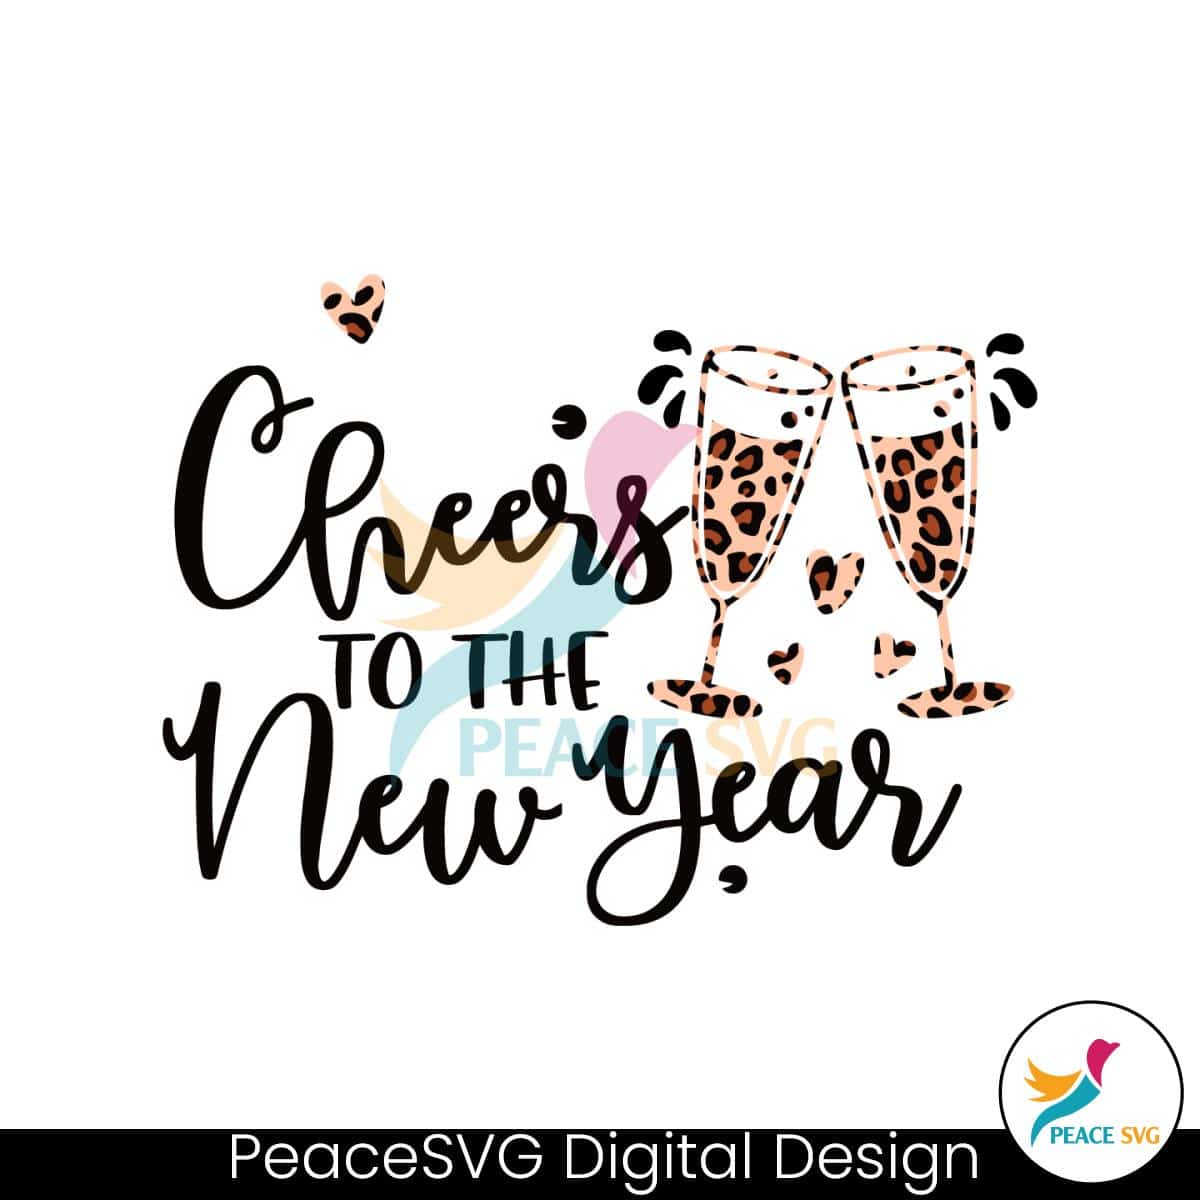 retro-cheers-to-the-new-year-svg